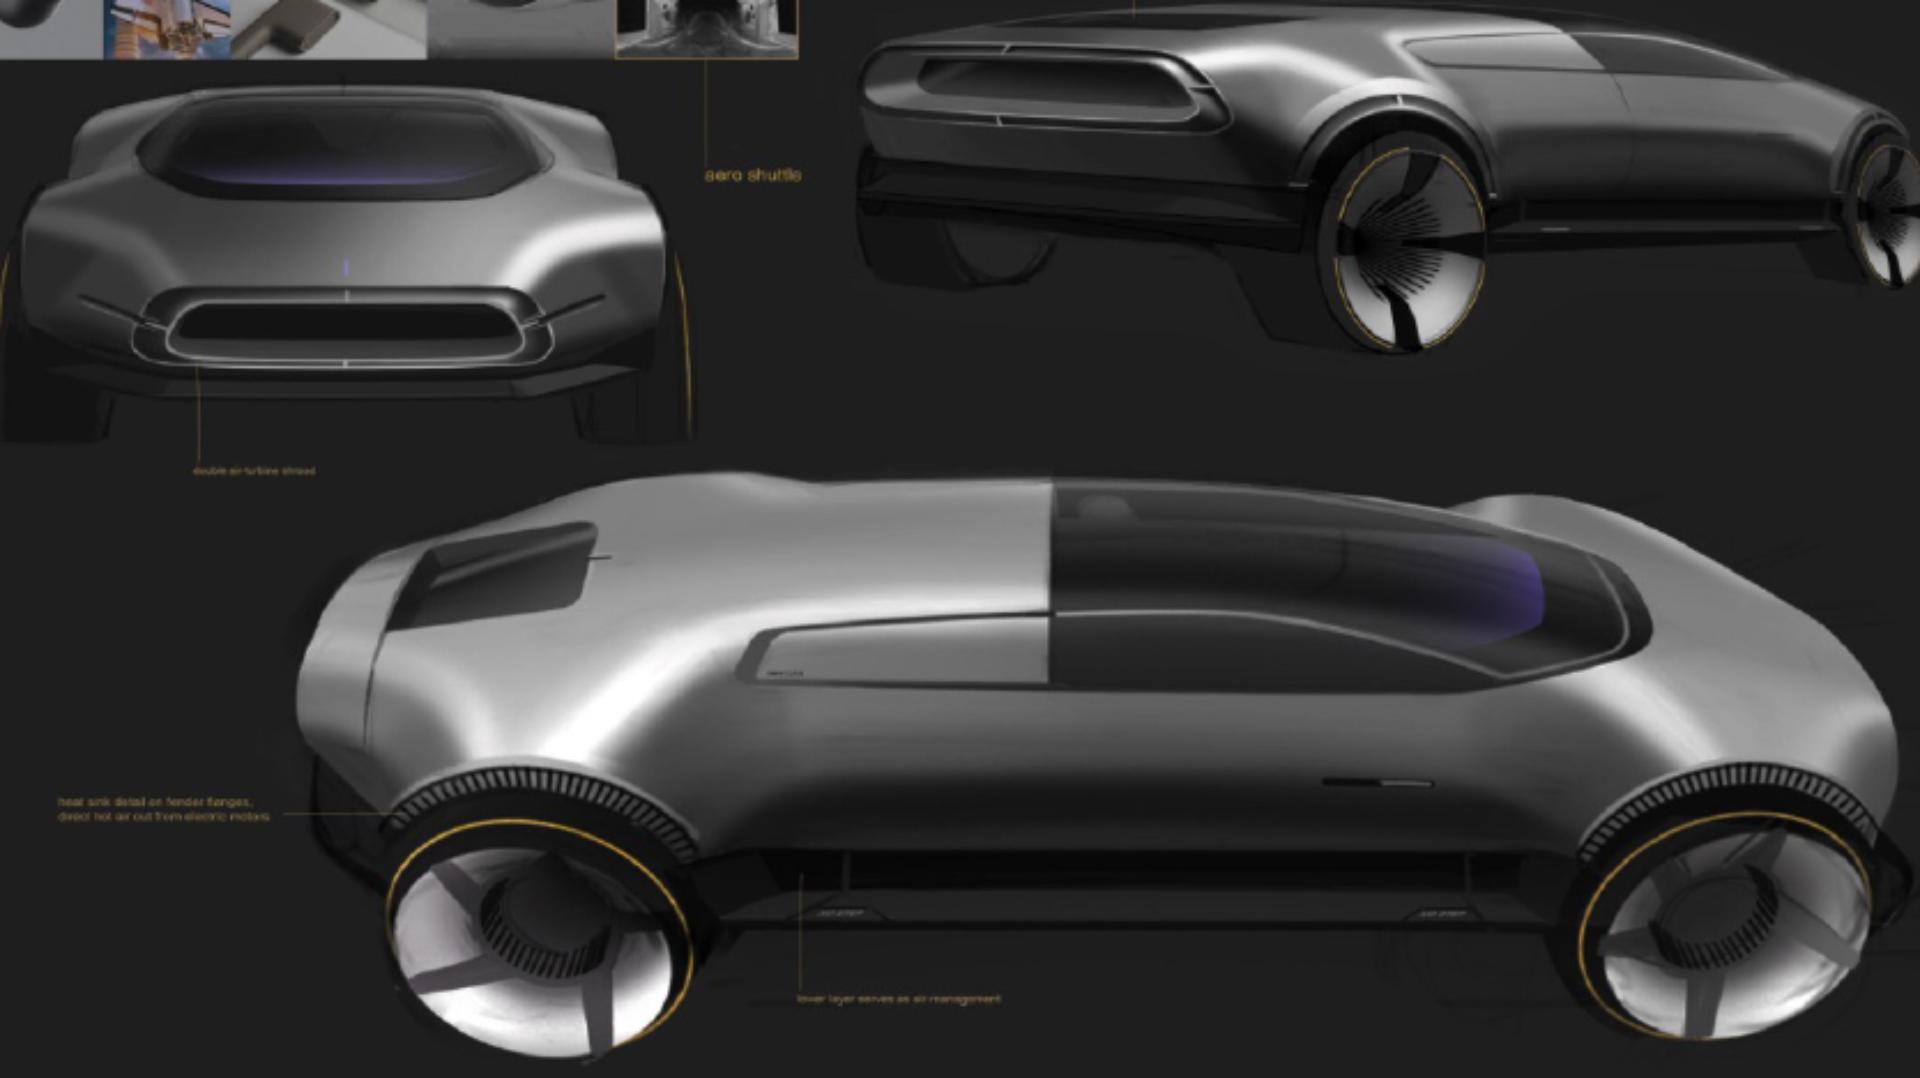 Concept drawings of the Dyson car